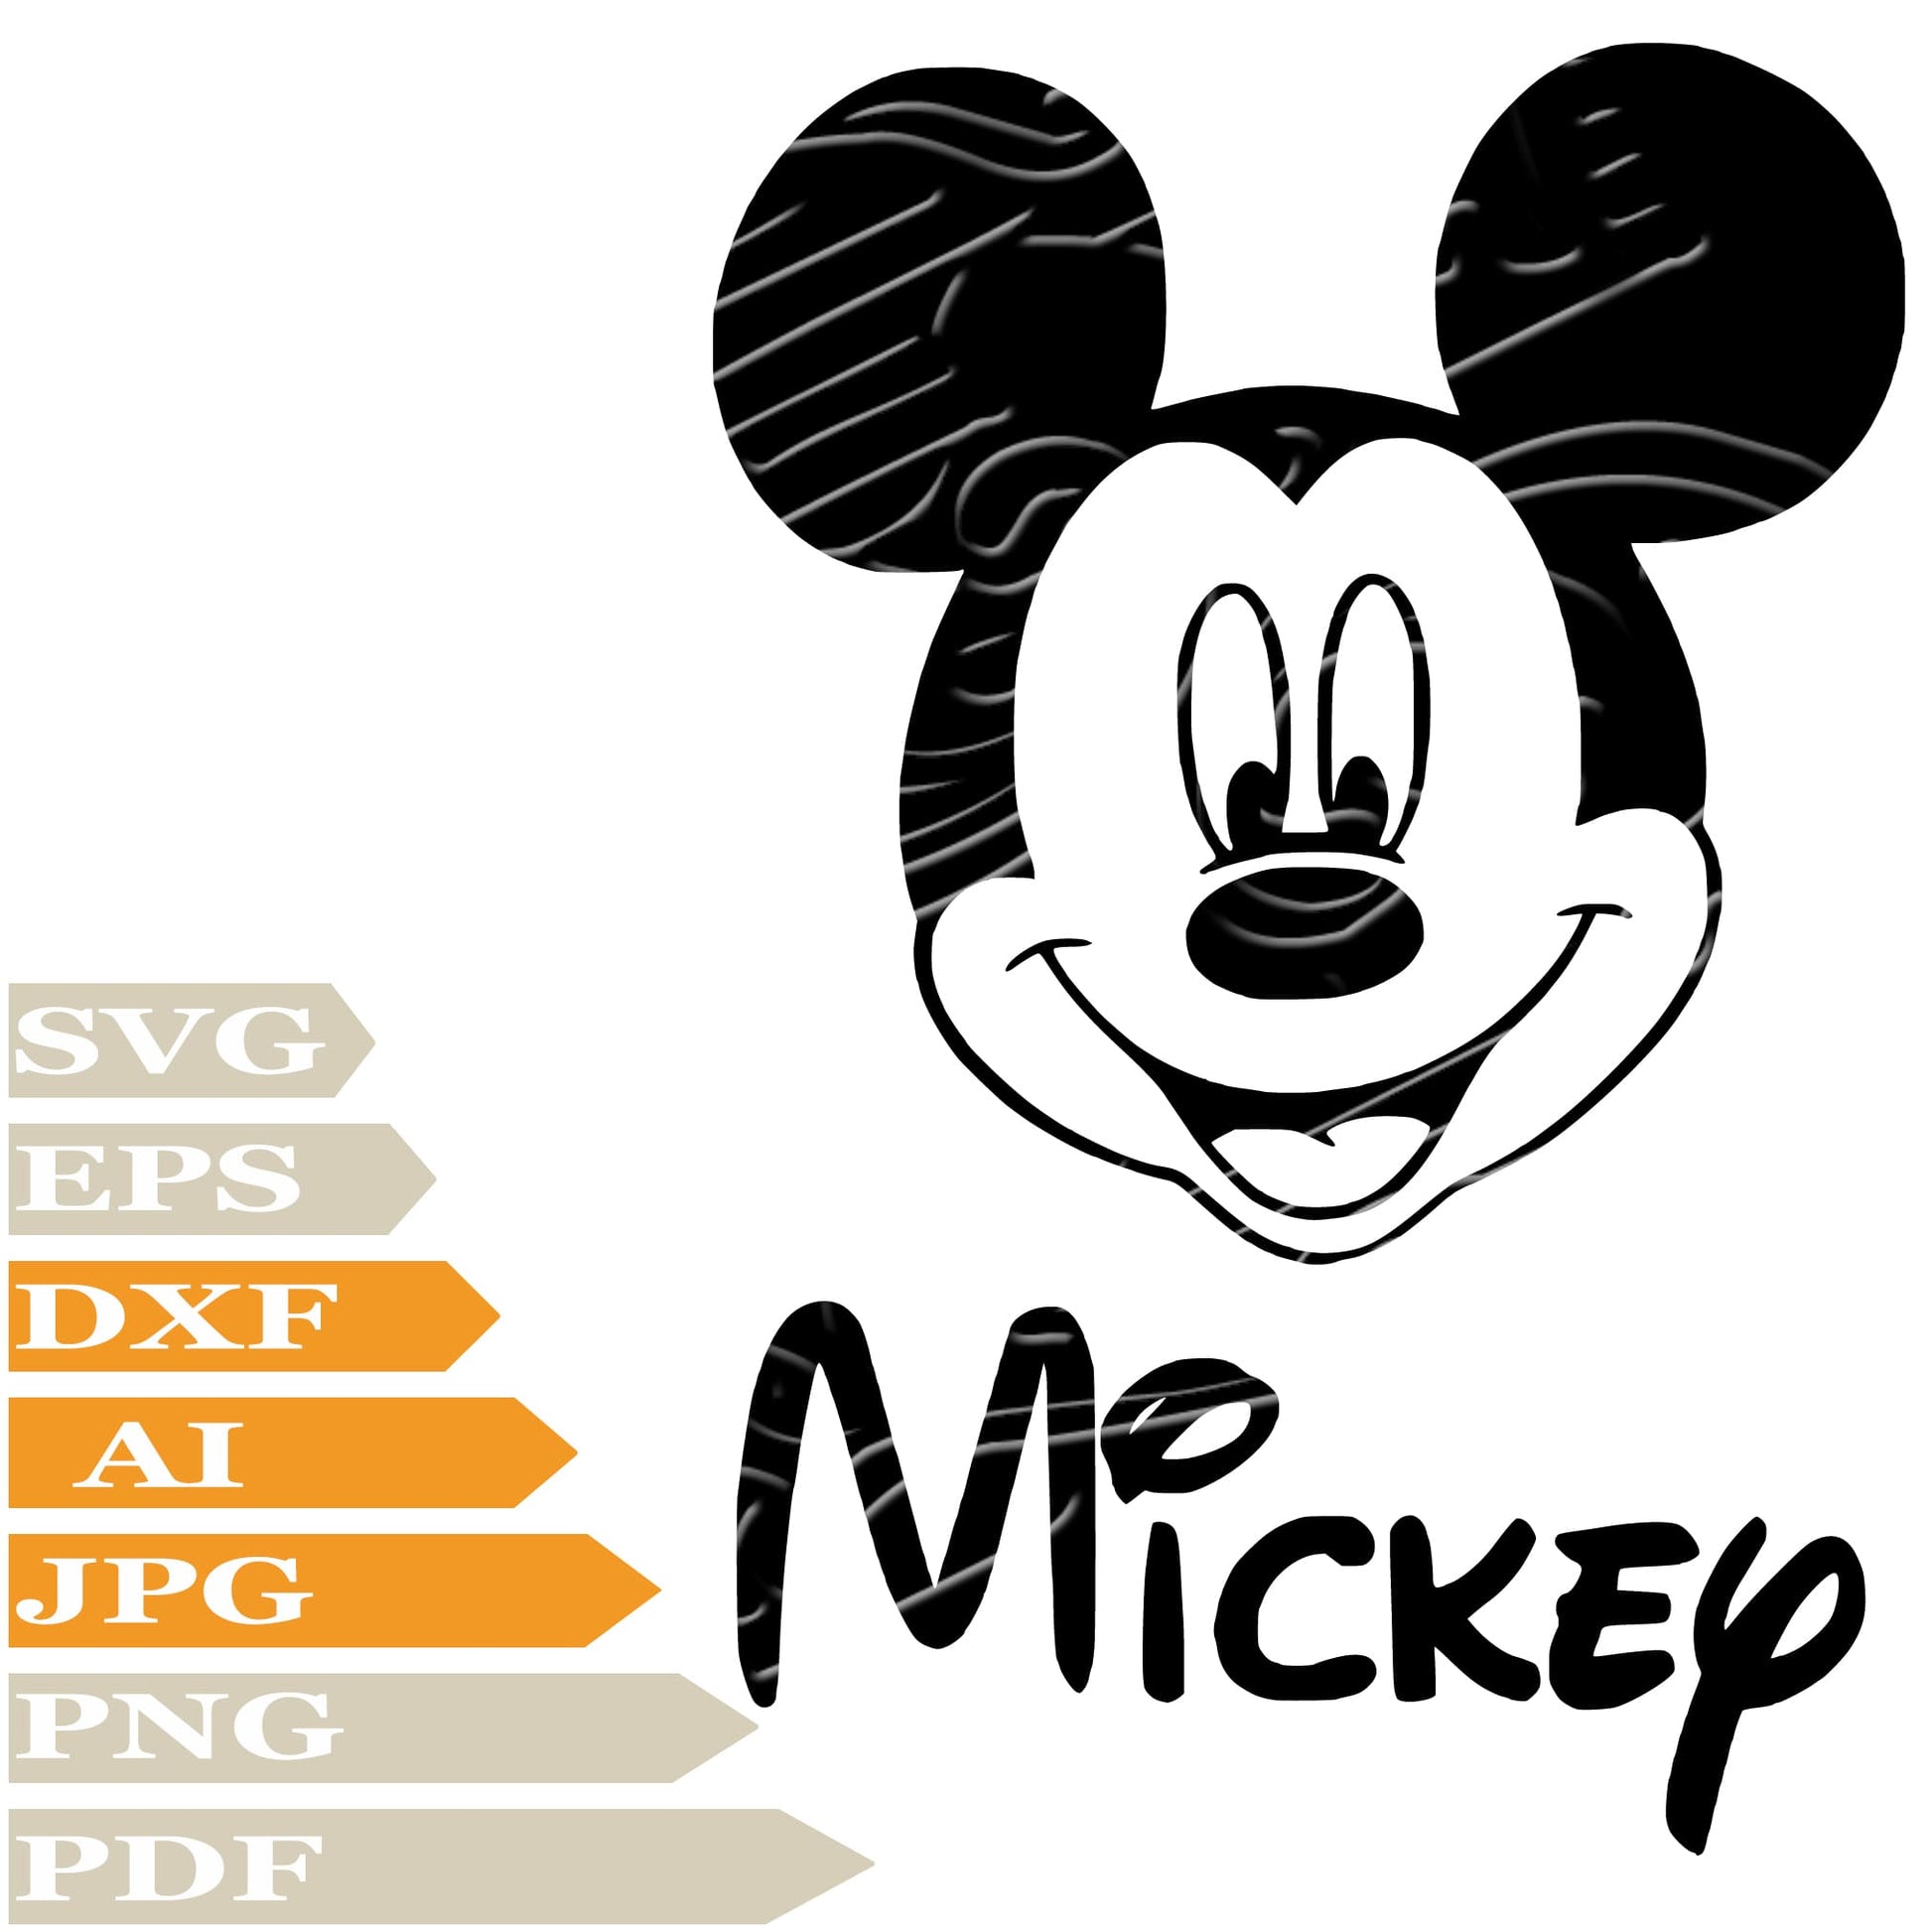 Mickey Mause, Minnie Mause Svg File, Image Cut, Png, For Tattoo, Silhouette, Digital Vector Download, Cut File, Clipart, For Cricut